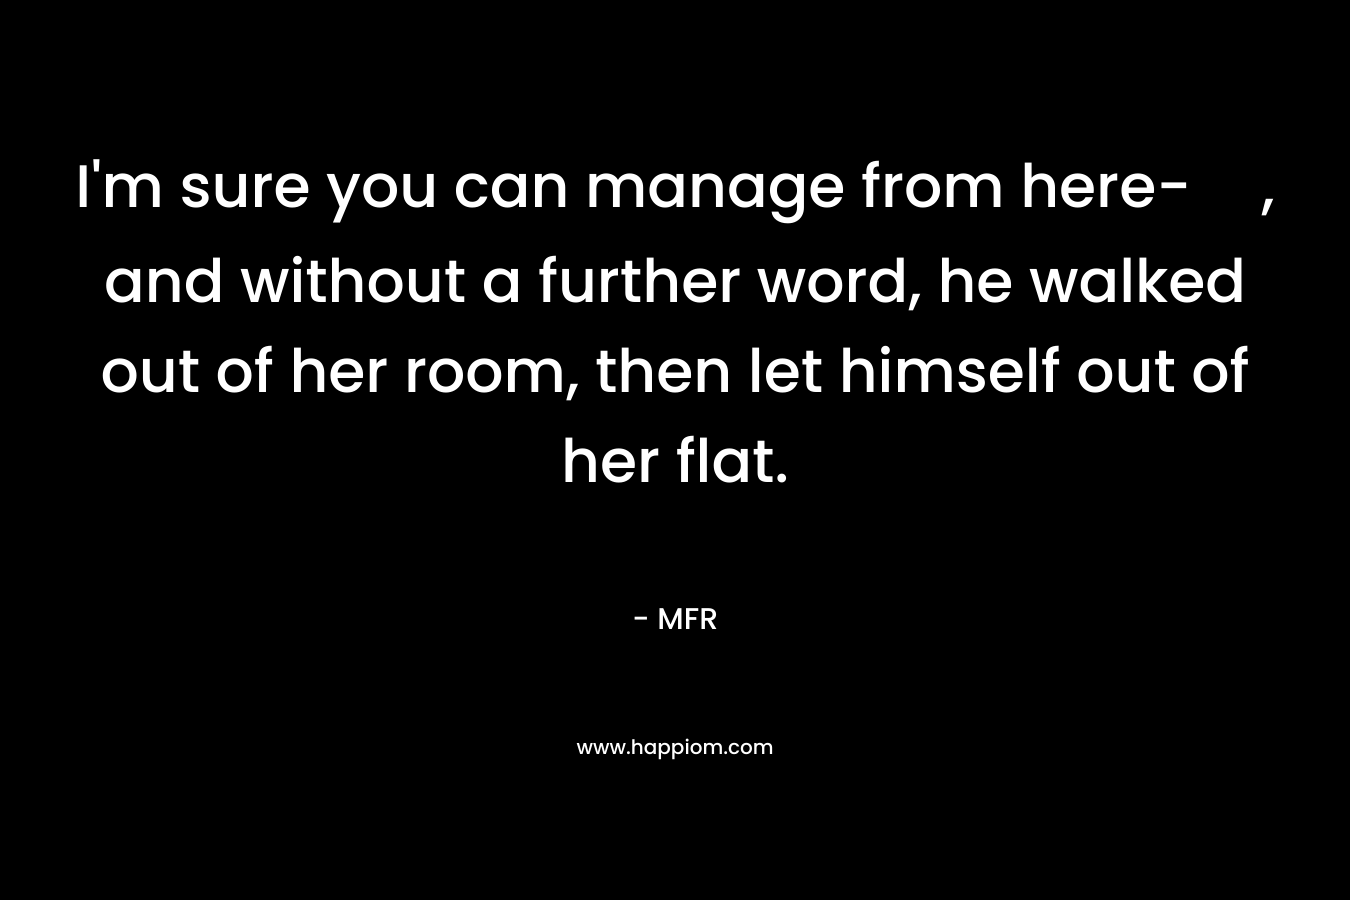 I’m sure you can manage from here-, and without a further word, he walked out of her room, then let himself out of her flat. – MFR